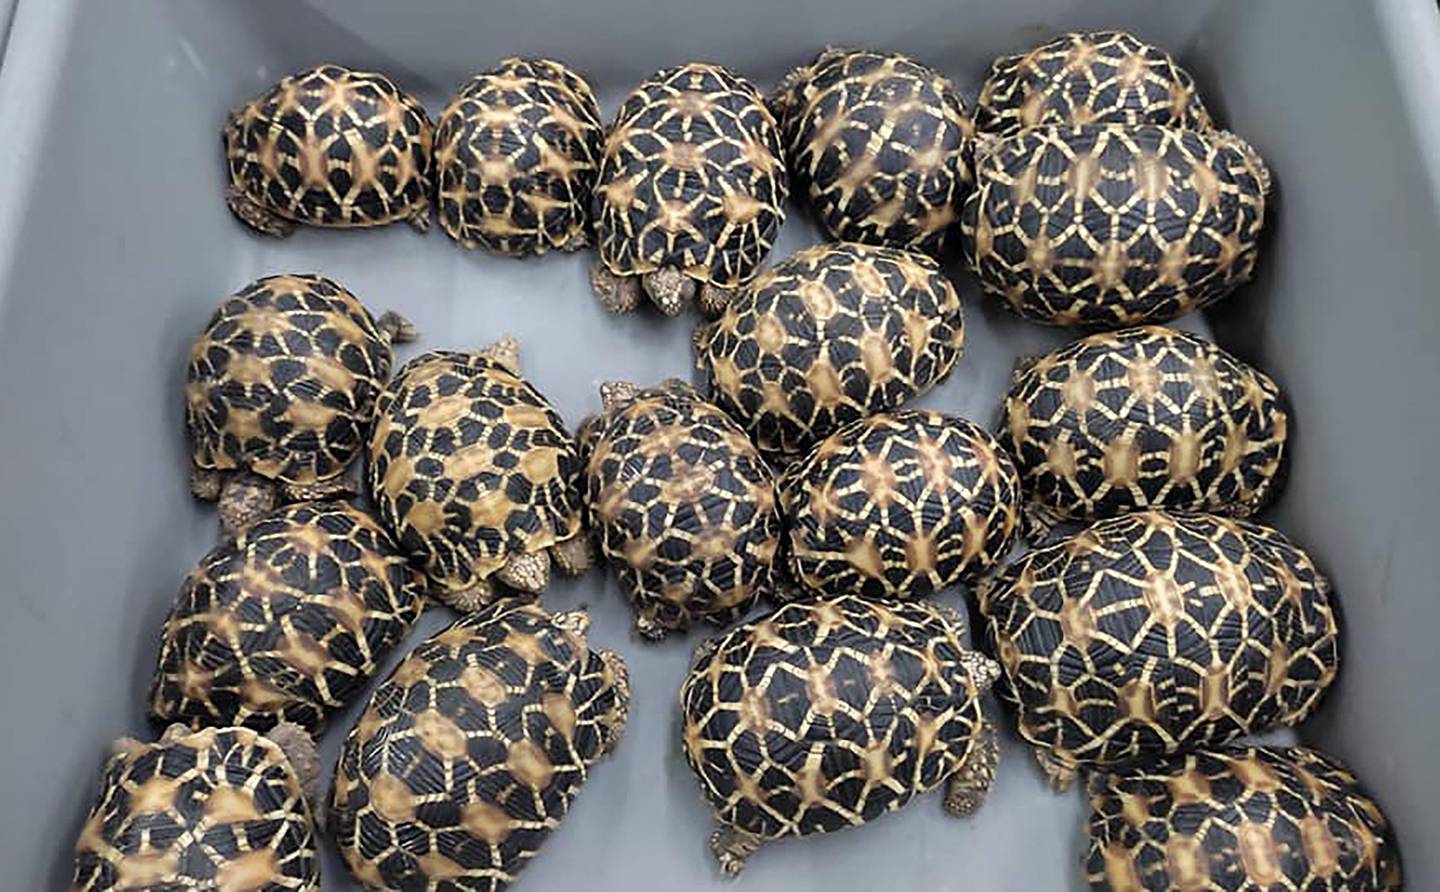 Some of the 81 star tortoises found in the luggage of an Indian man arriving from Chennai in Bangkok. AFP